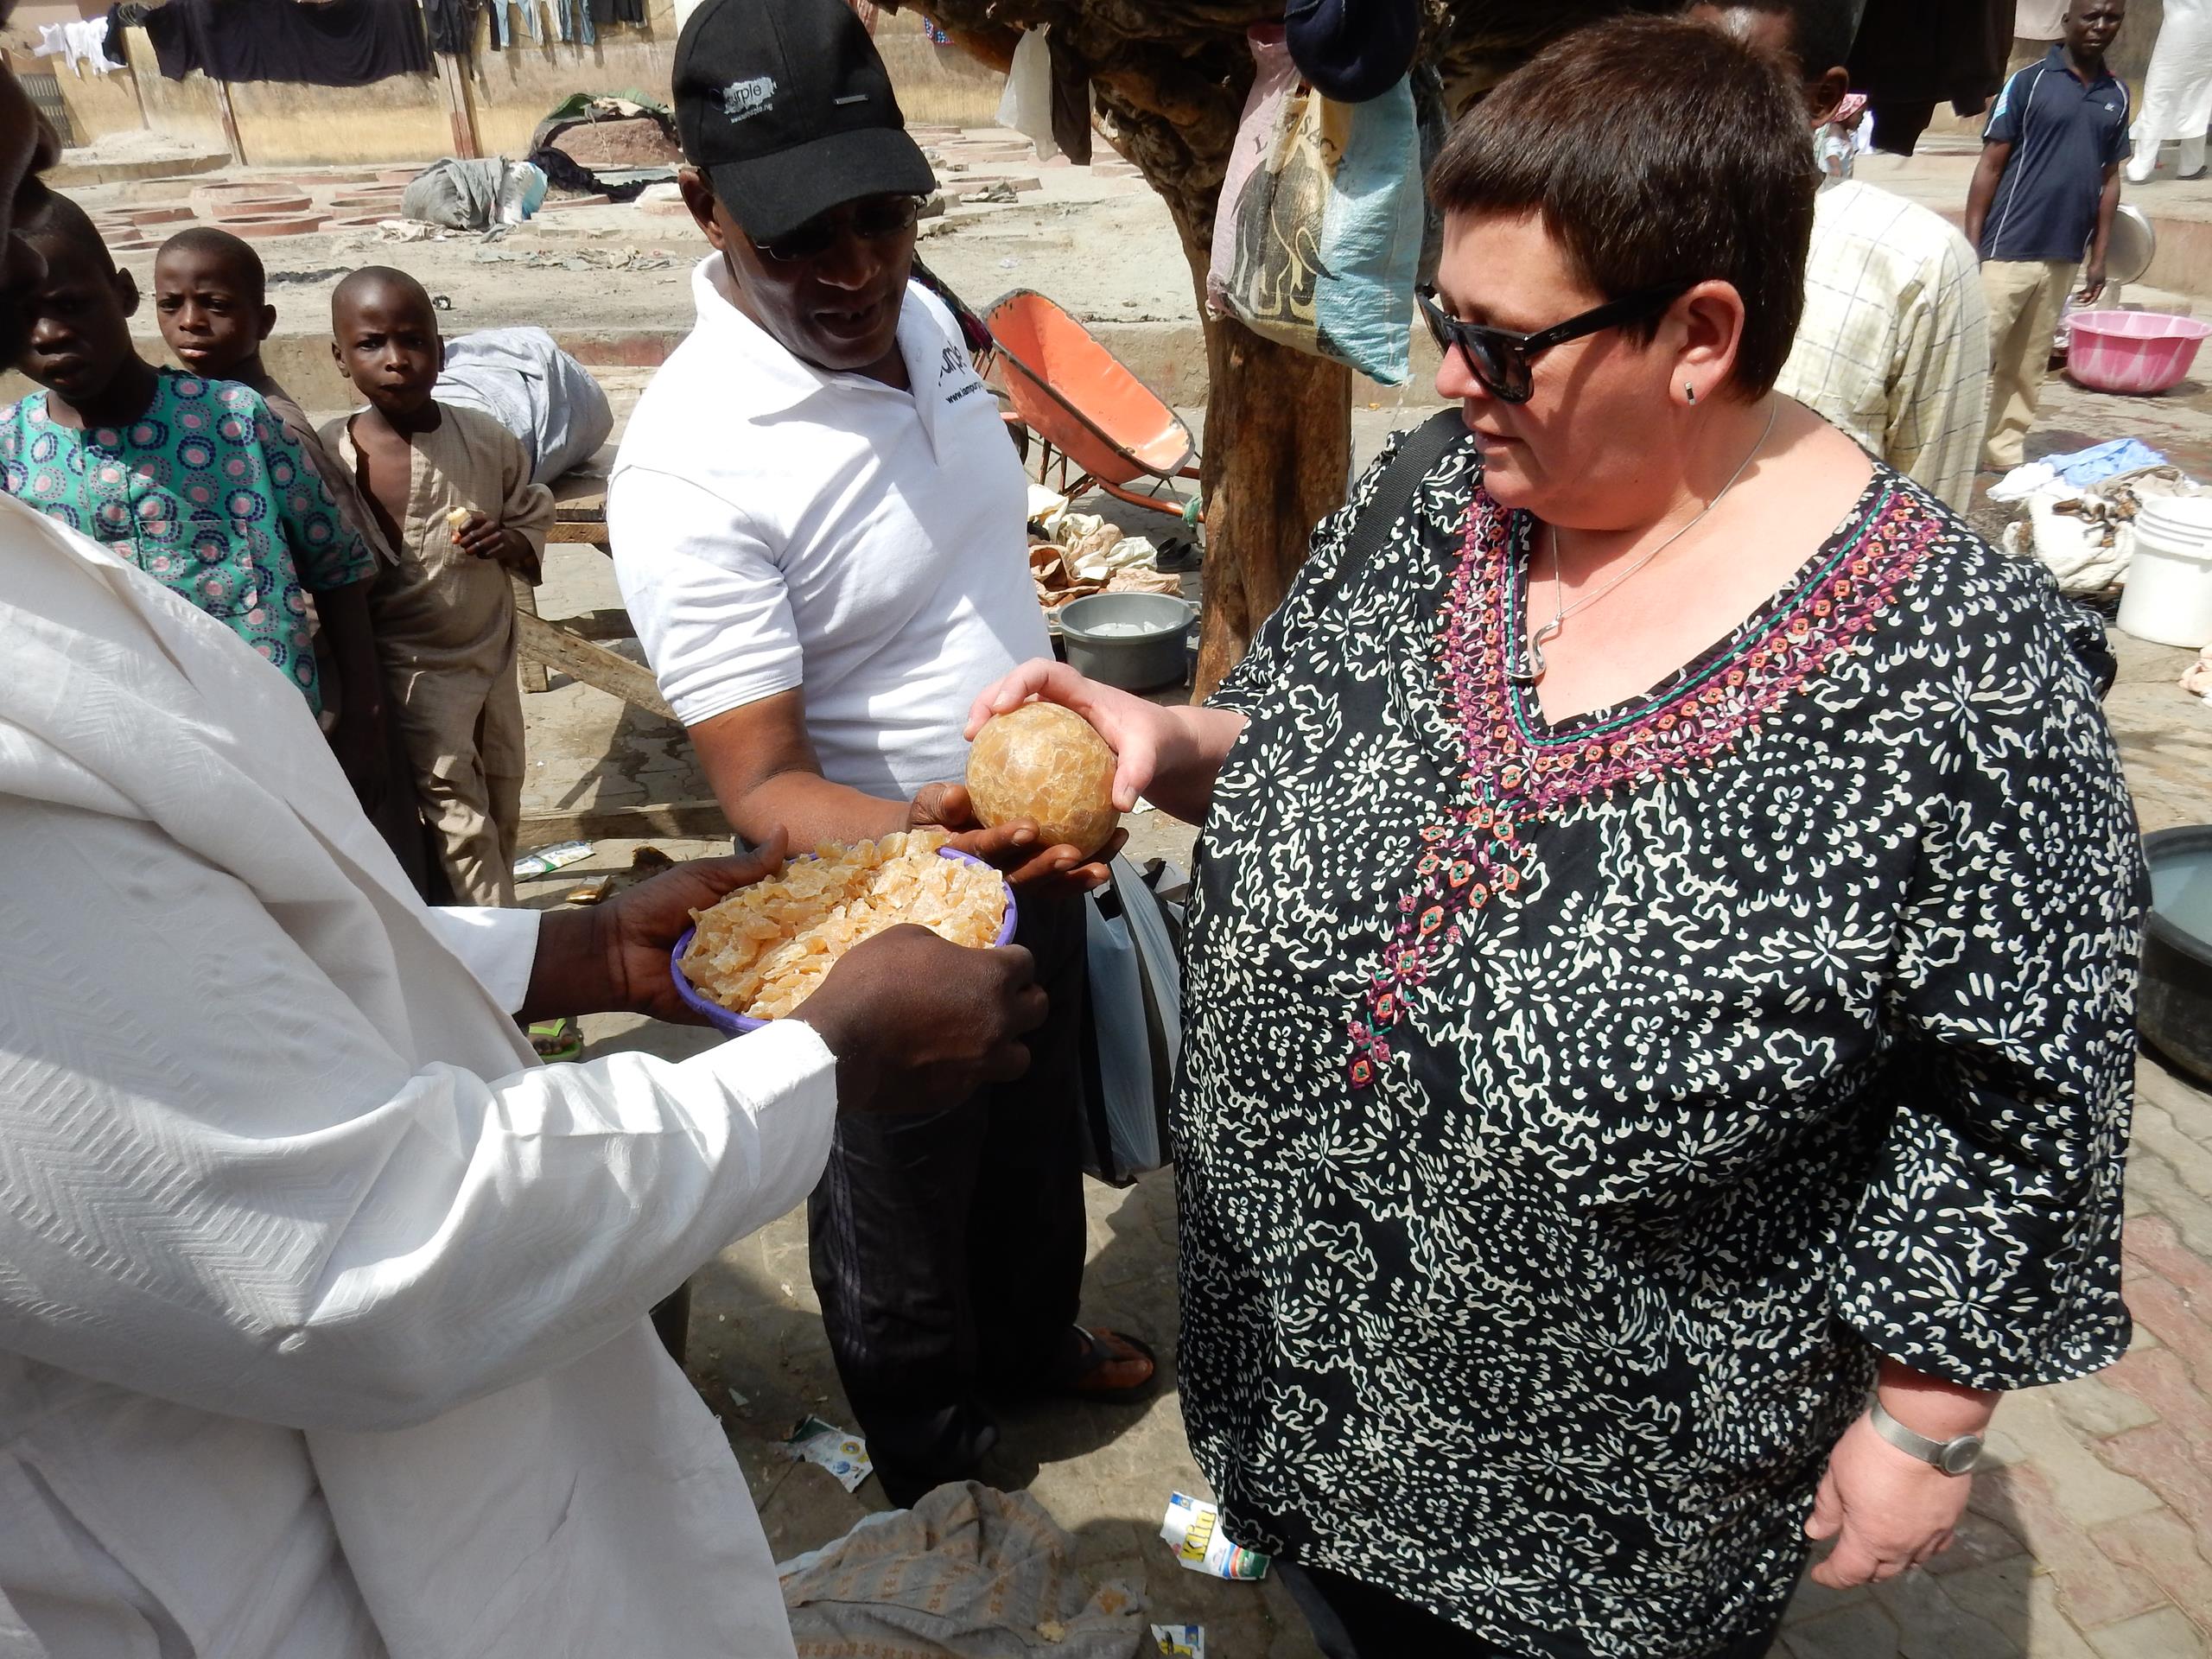 Caroline discussing the quality of locally produced soap in Kano, Nigeria